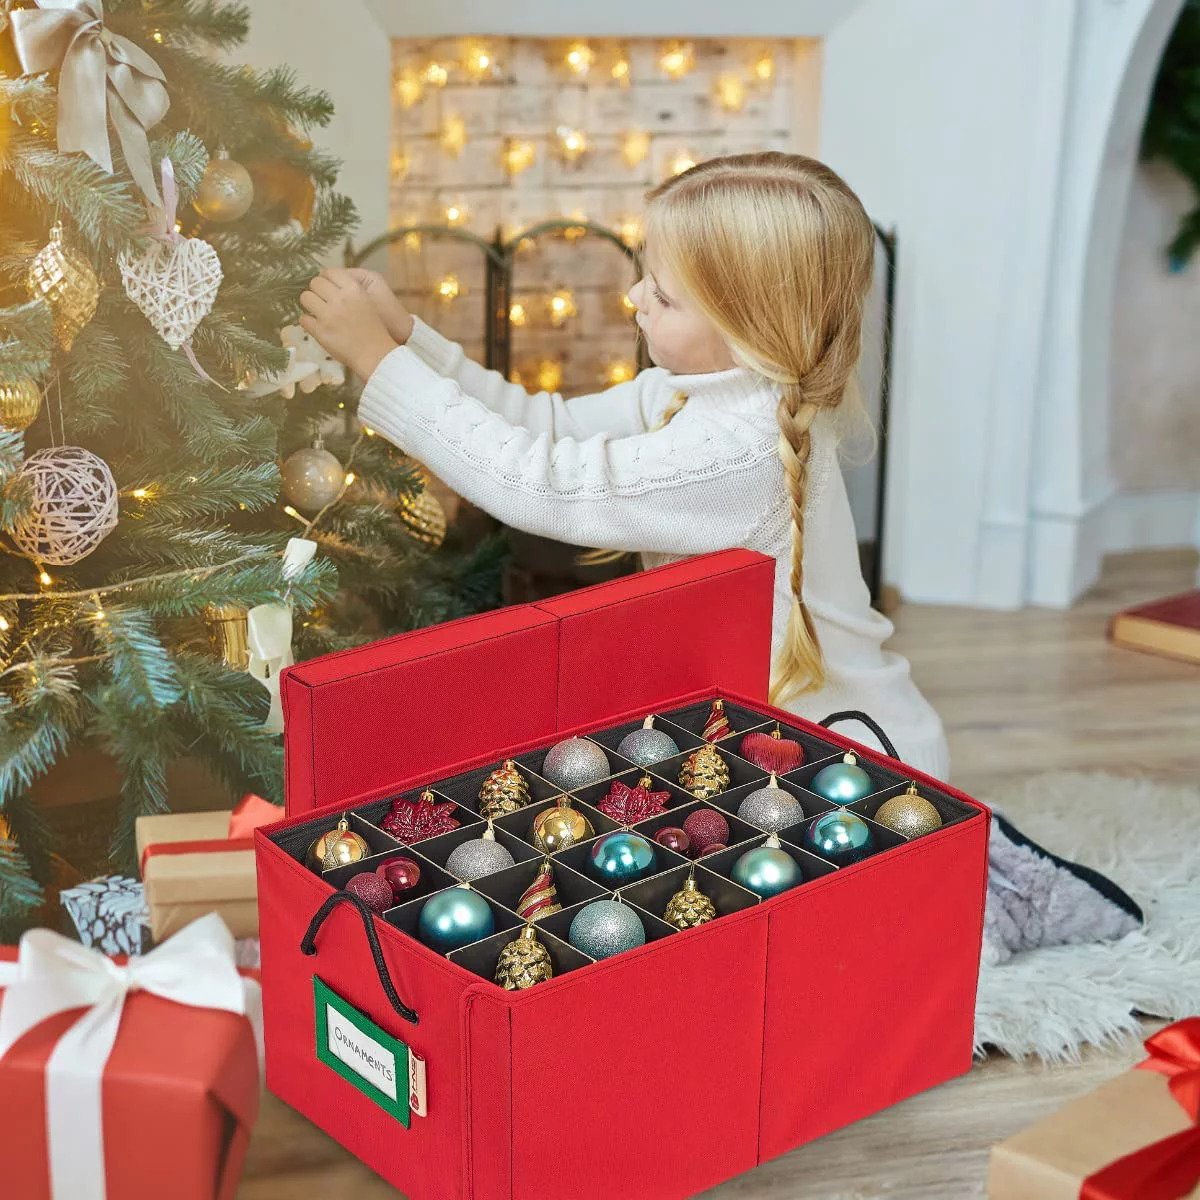 How To Store Christmas Ornaments